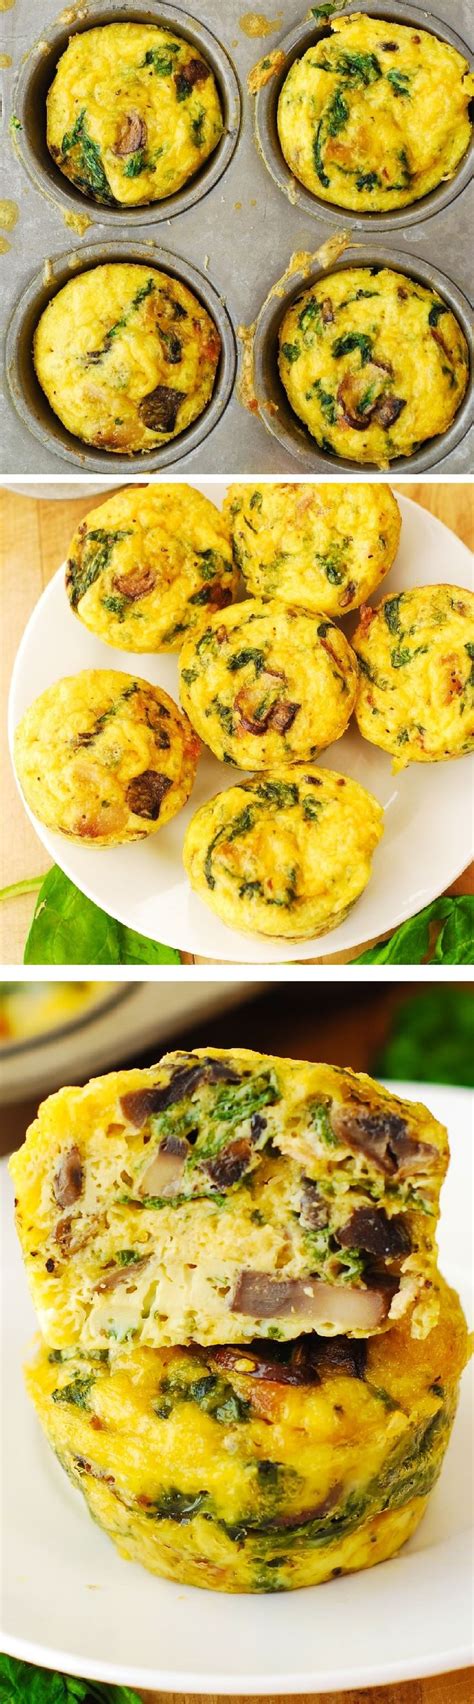 Breakfast Egg Muffins With Mushrooms And Spinach These Crustless Mini